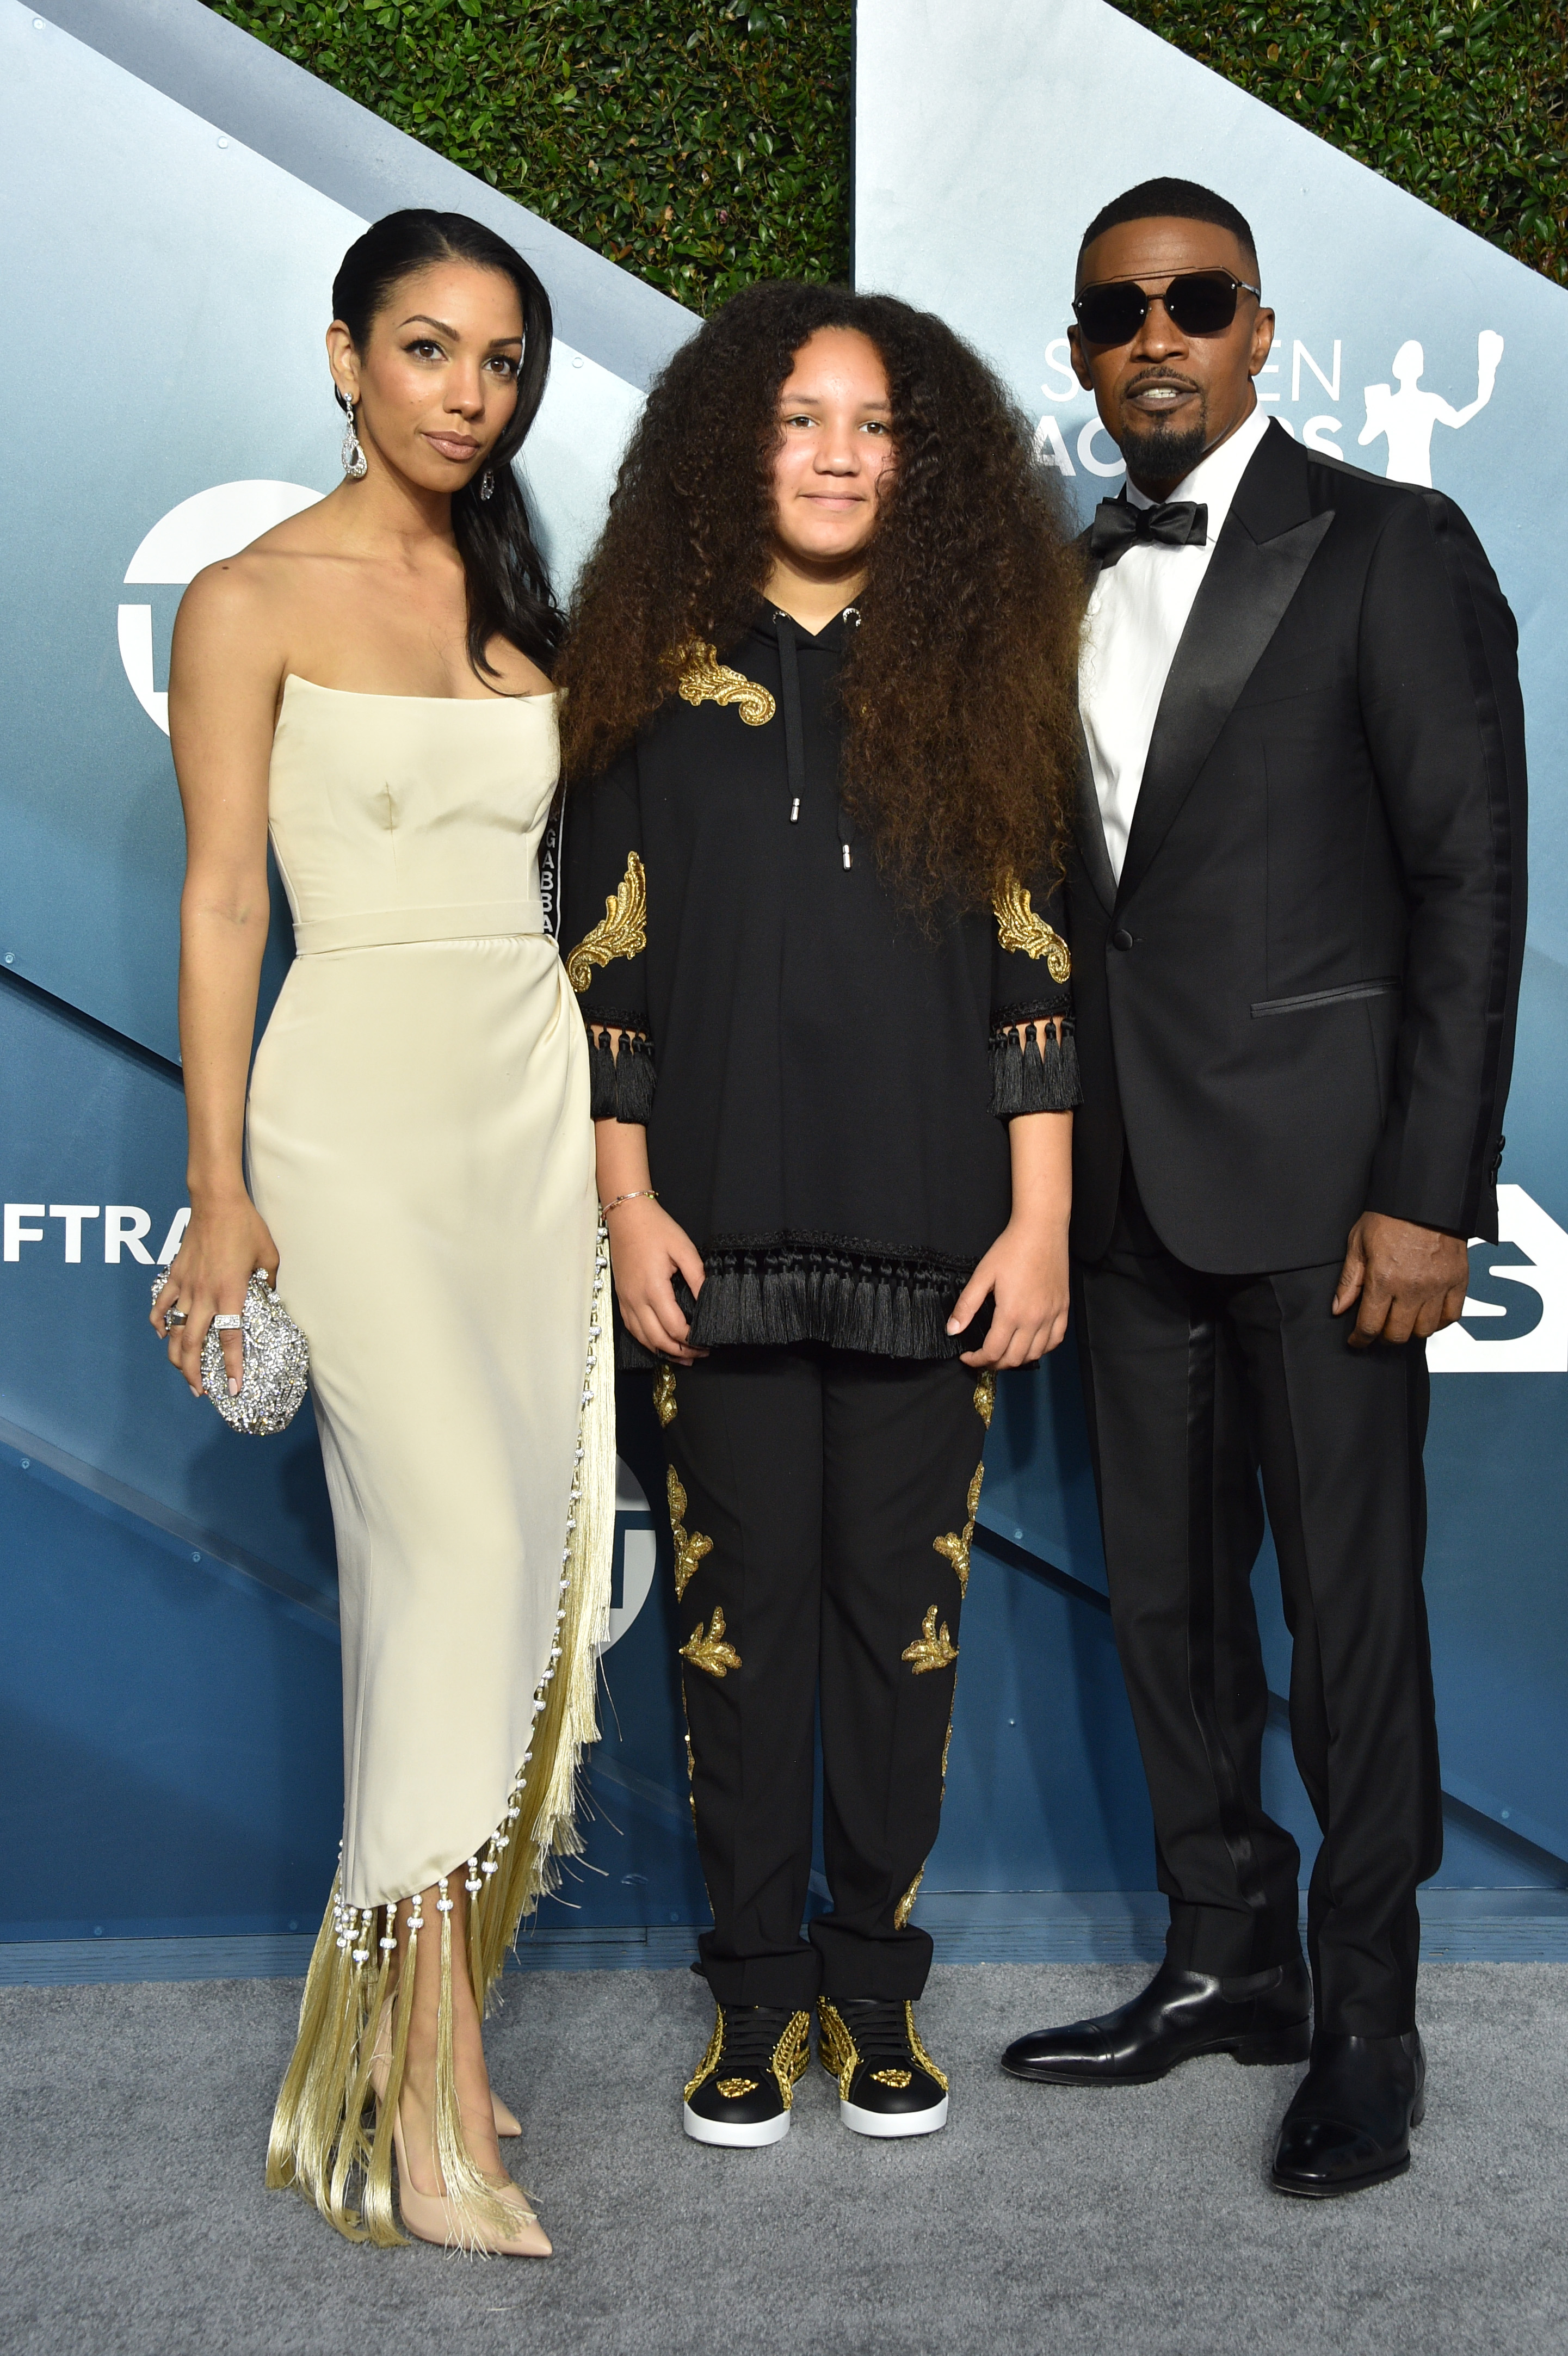 Corinne Foxx, Anelise Bishop, and Jamie Foxx at the 26th Annual Screen Actors Guild Awards on January 19, 2020, in Los Angeles, California | Source: Getty Images